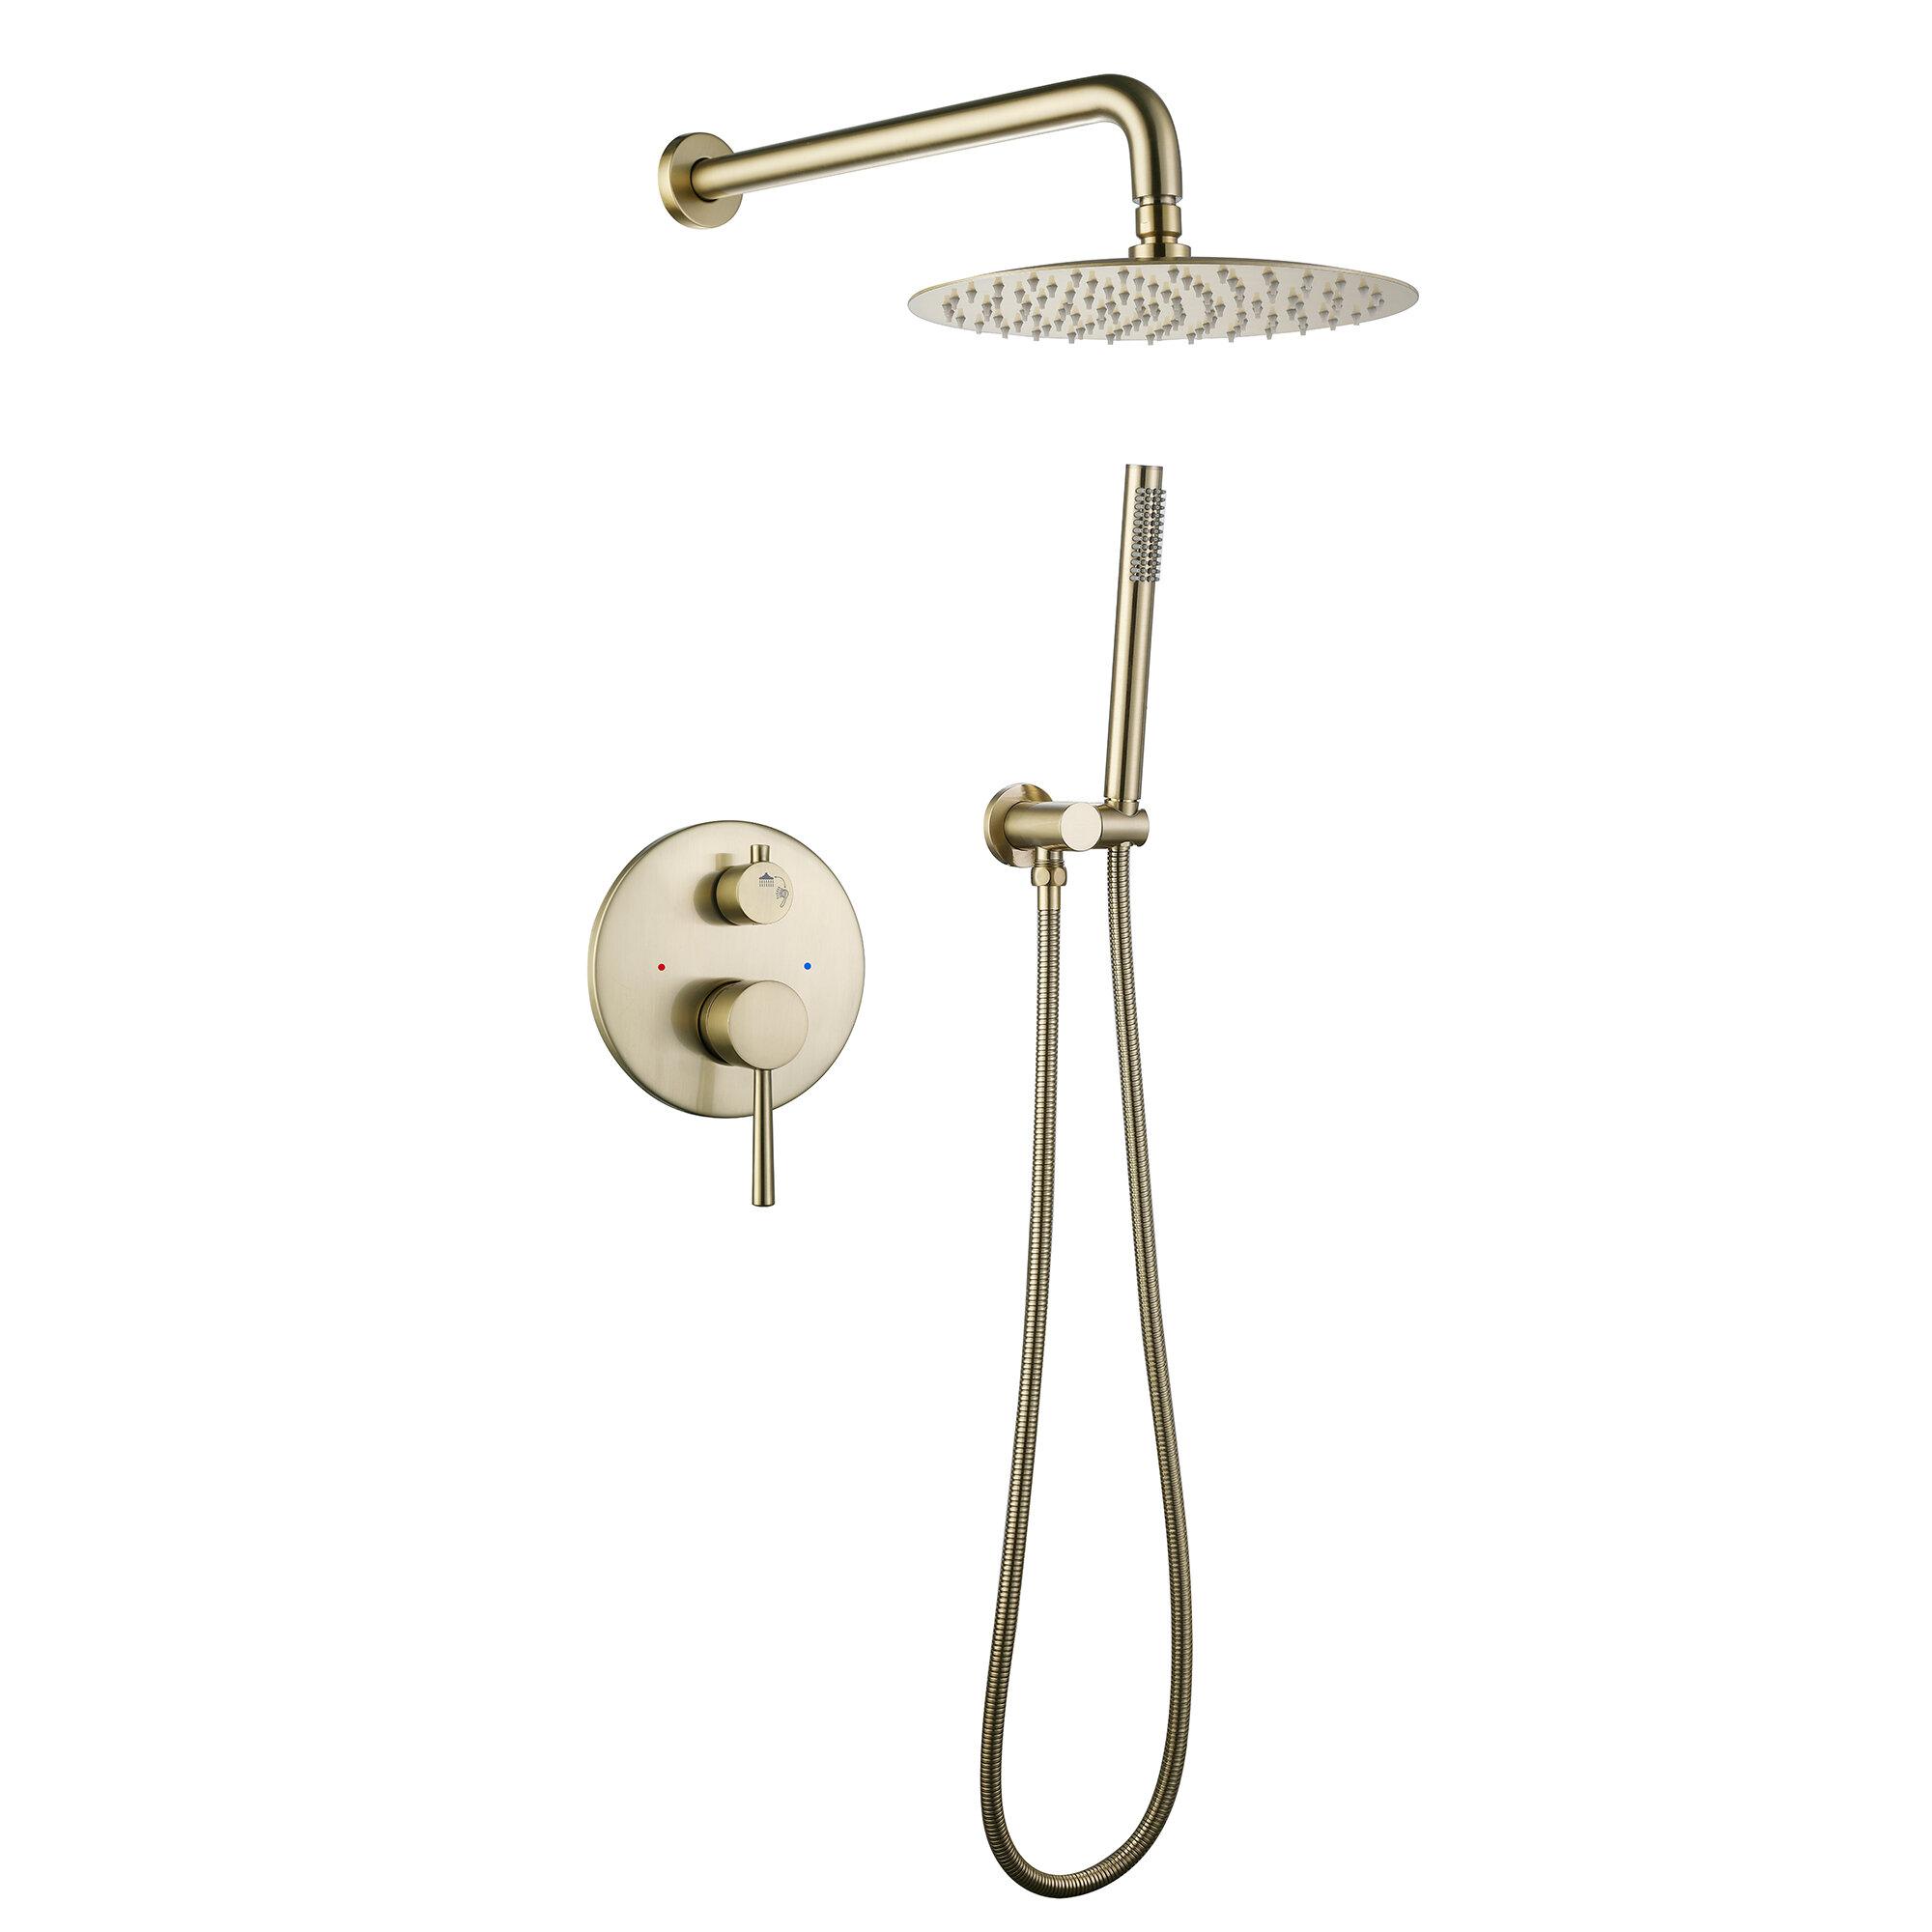 Golden Shower Head Single Handle Valve Faucet W Hand Shower Hot And Cold Mixer